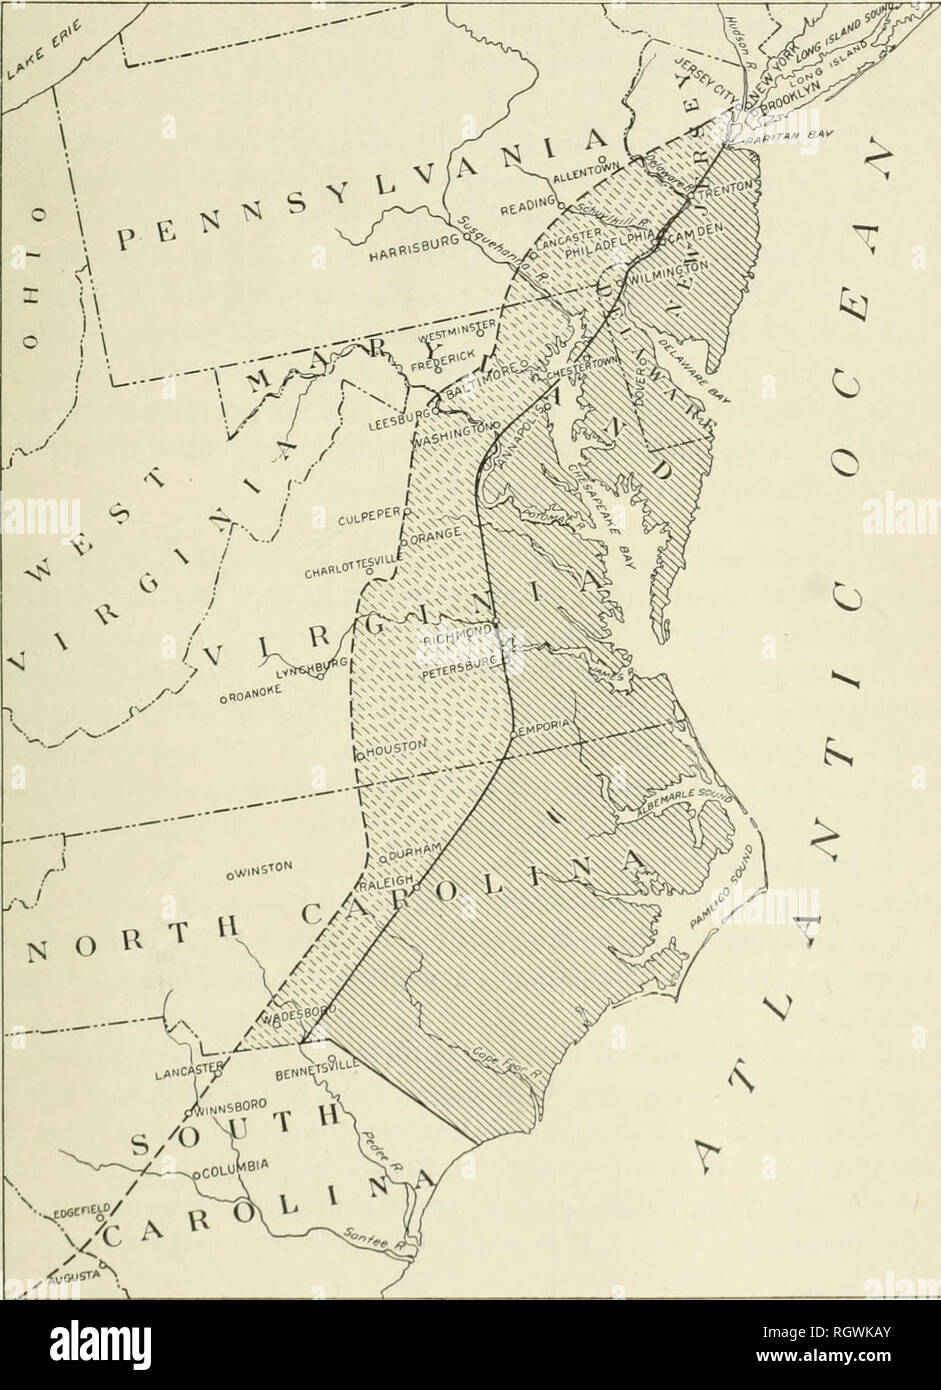 Bulletin 1901 13 Agriculture Agriculture Description Of The Coastal Plain Region 9 This Being Largely An Arbitrary Boundary Line The Approximate Position Of This Contour Is Indicated On The Map Fig 1